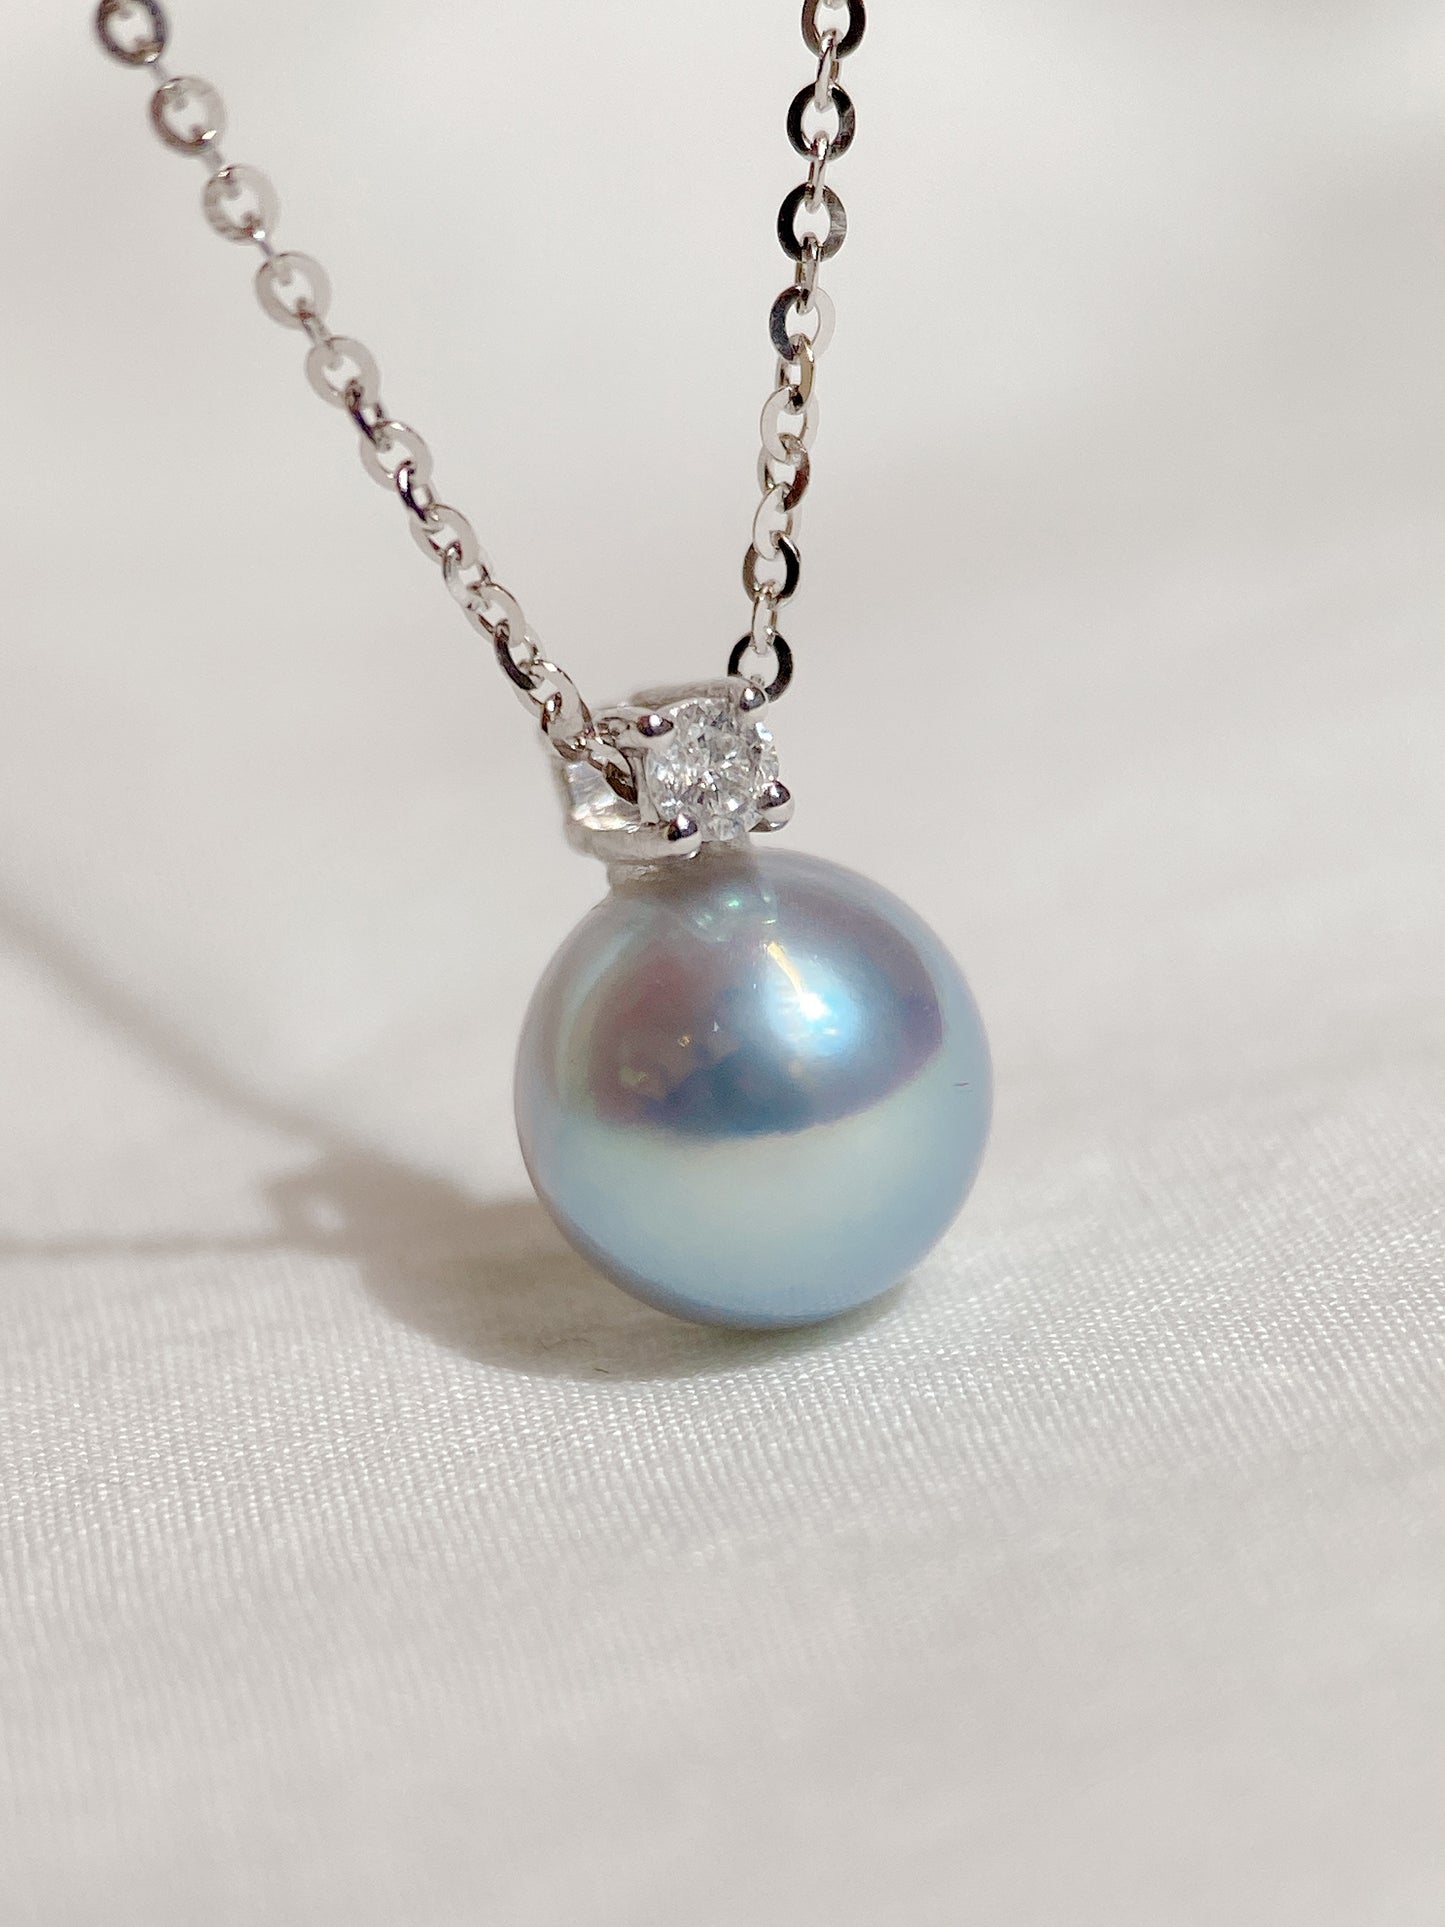 Blue Akoya Pearl Pendant in 18K White Gold with Diamond, d0.05ct,8-8.5mm